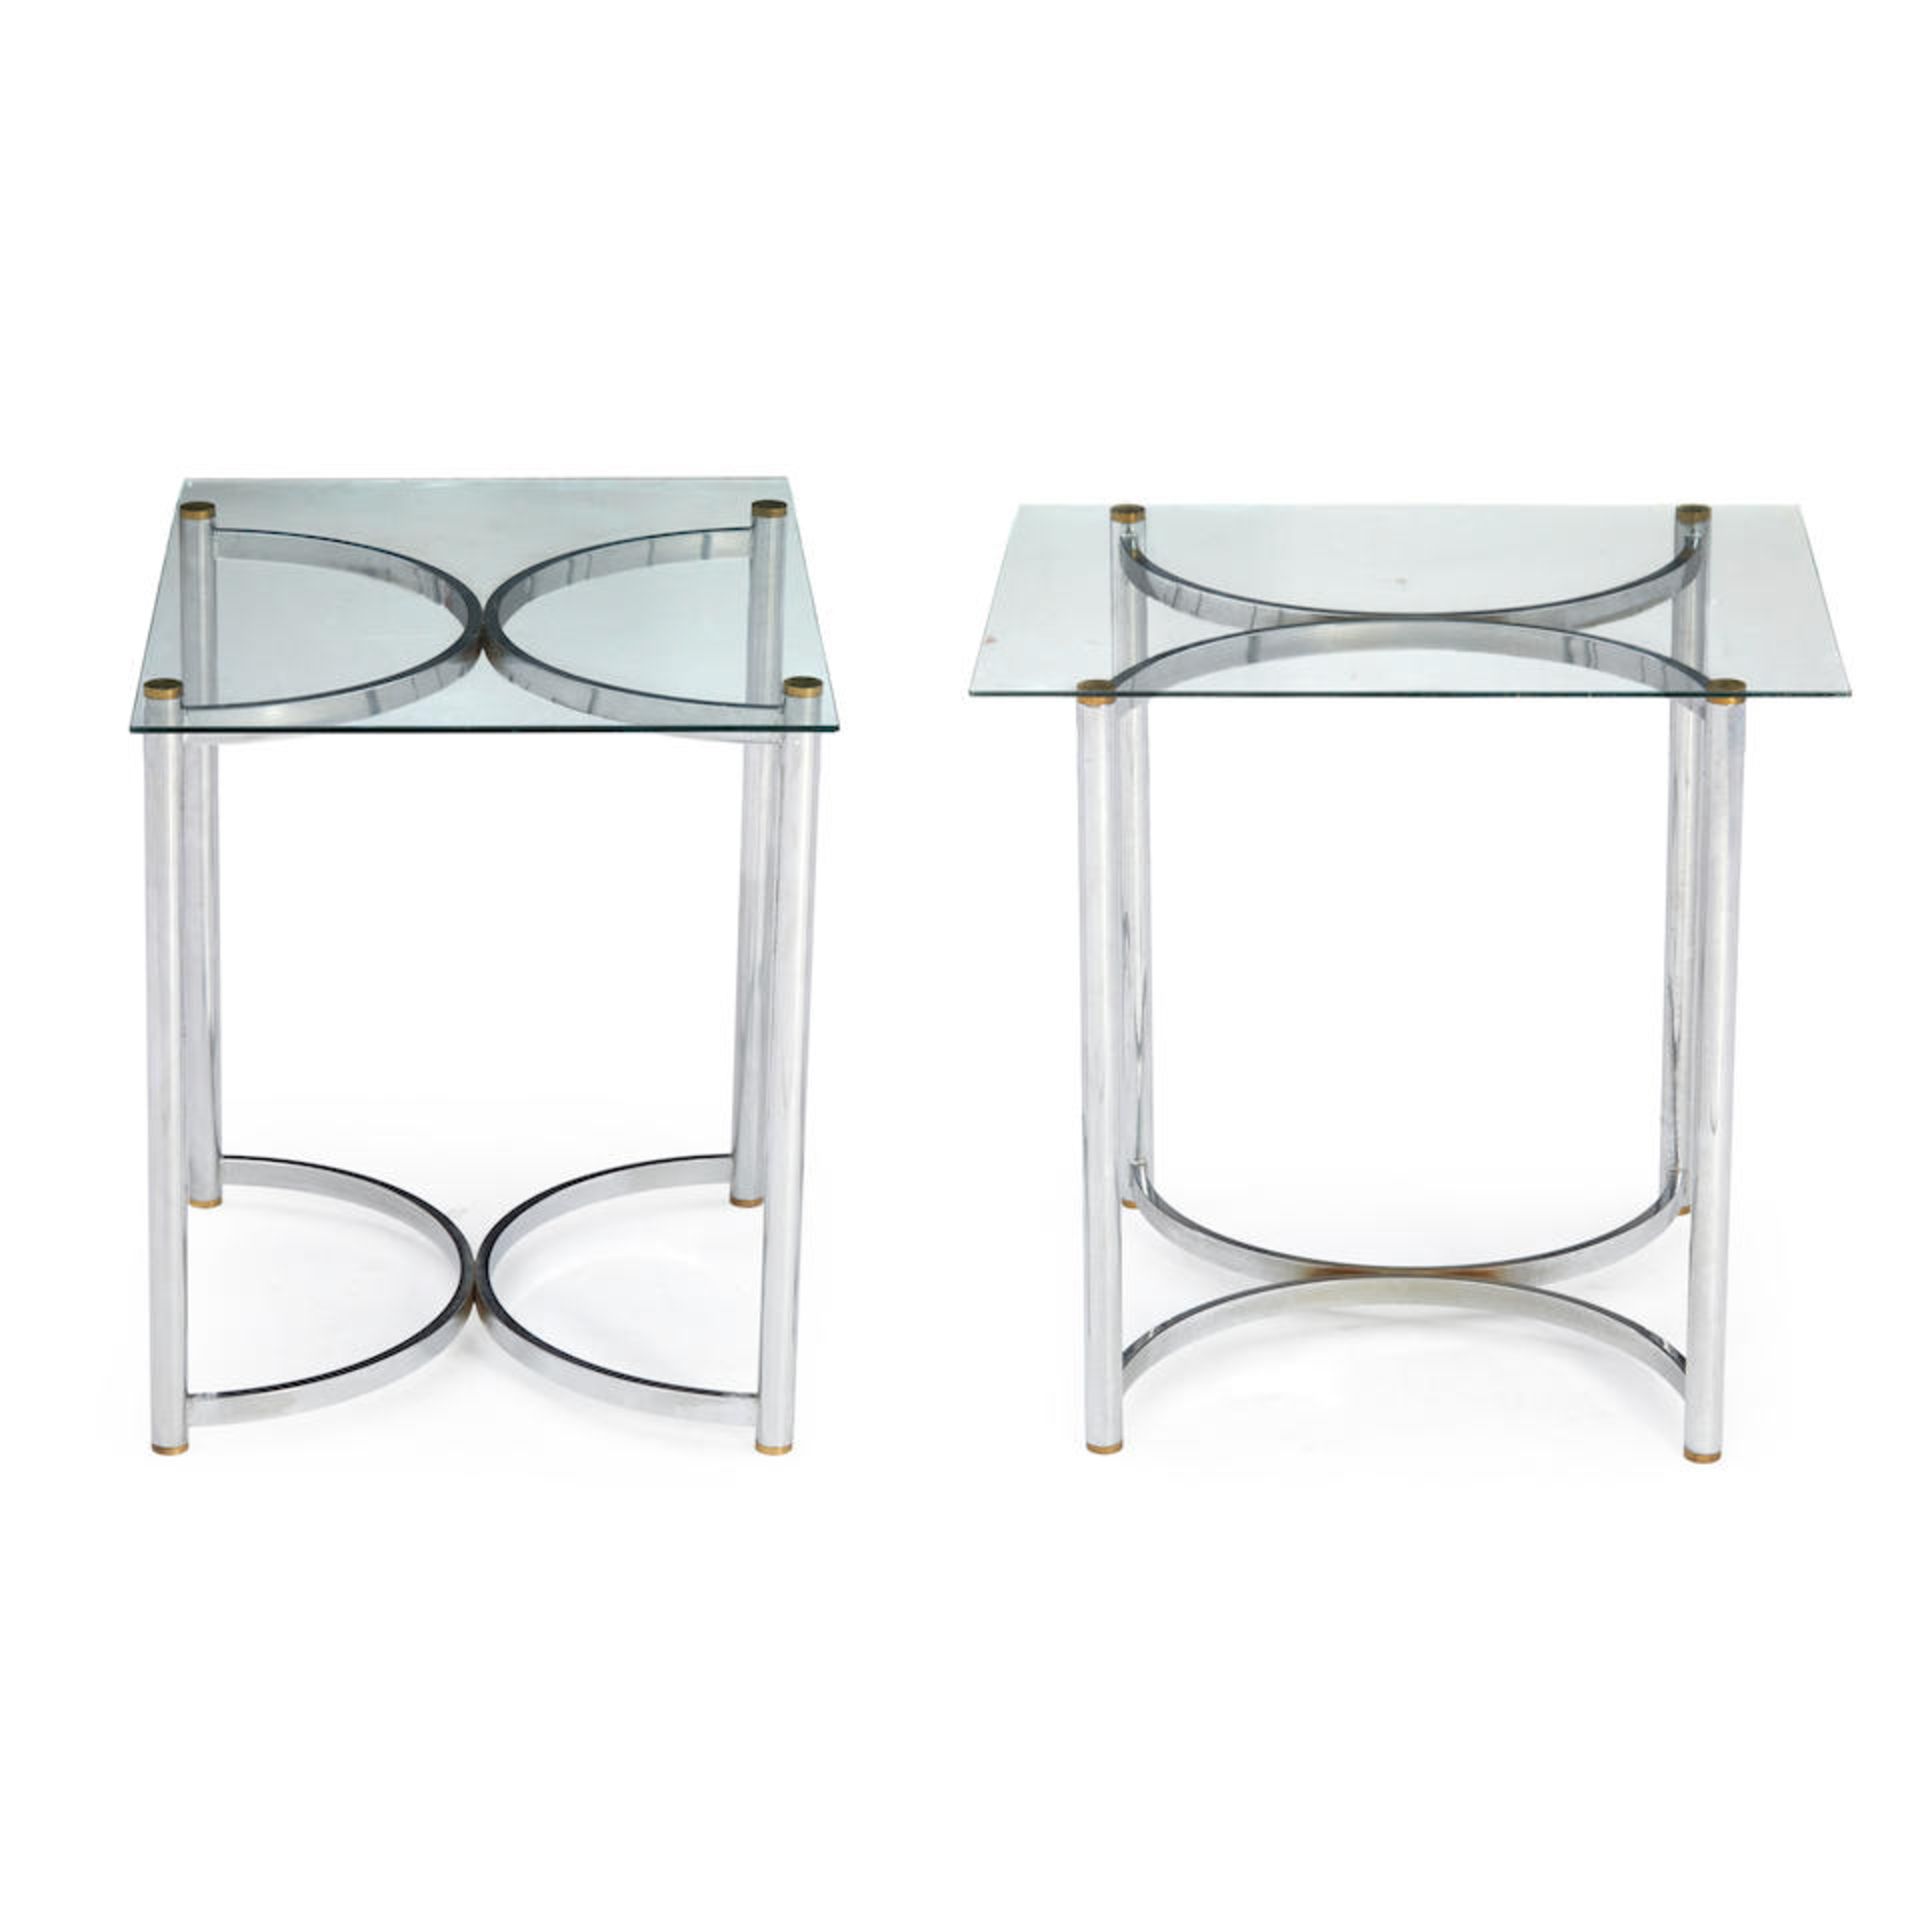 PAIR OF HOLLYWOOD REGENCY CHROME AND GLASS SIDE TABLES